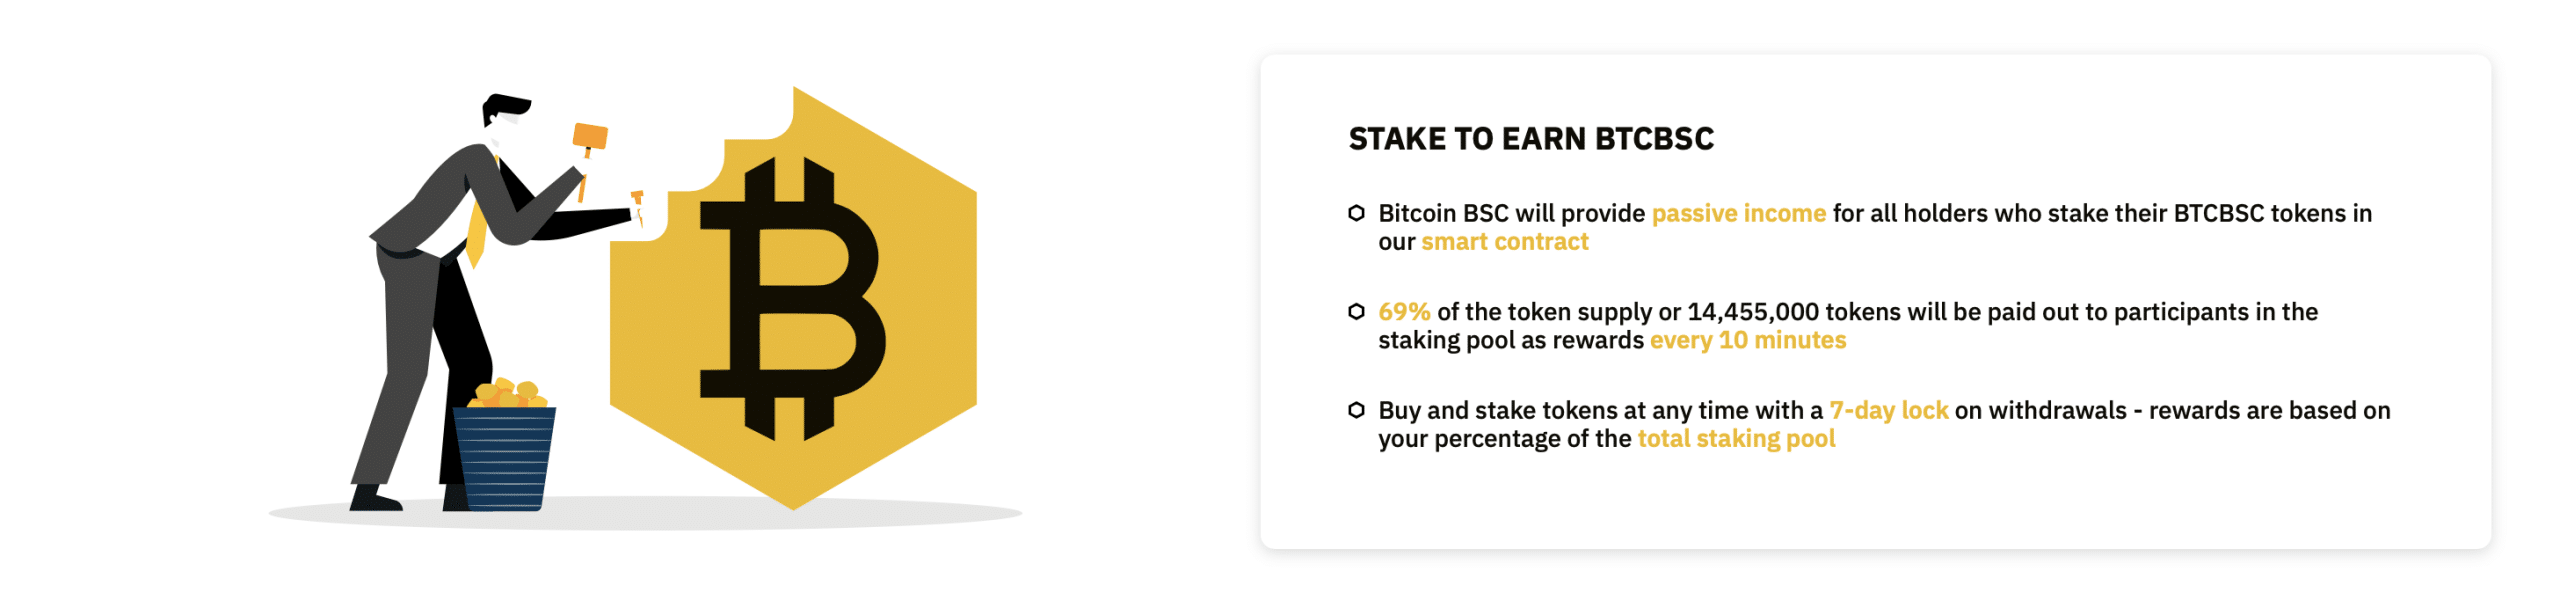 Stake to Earn